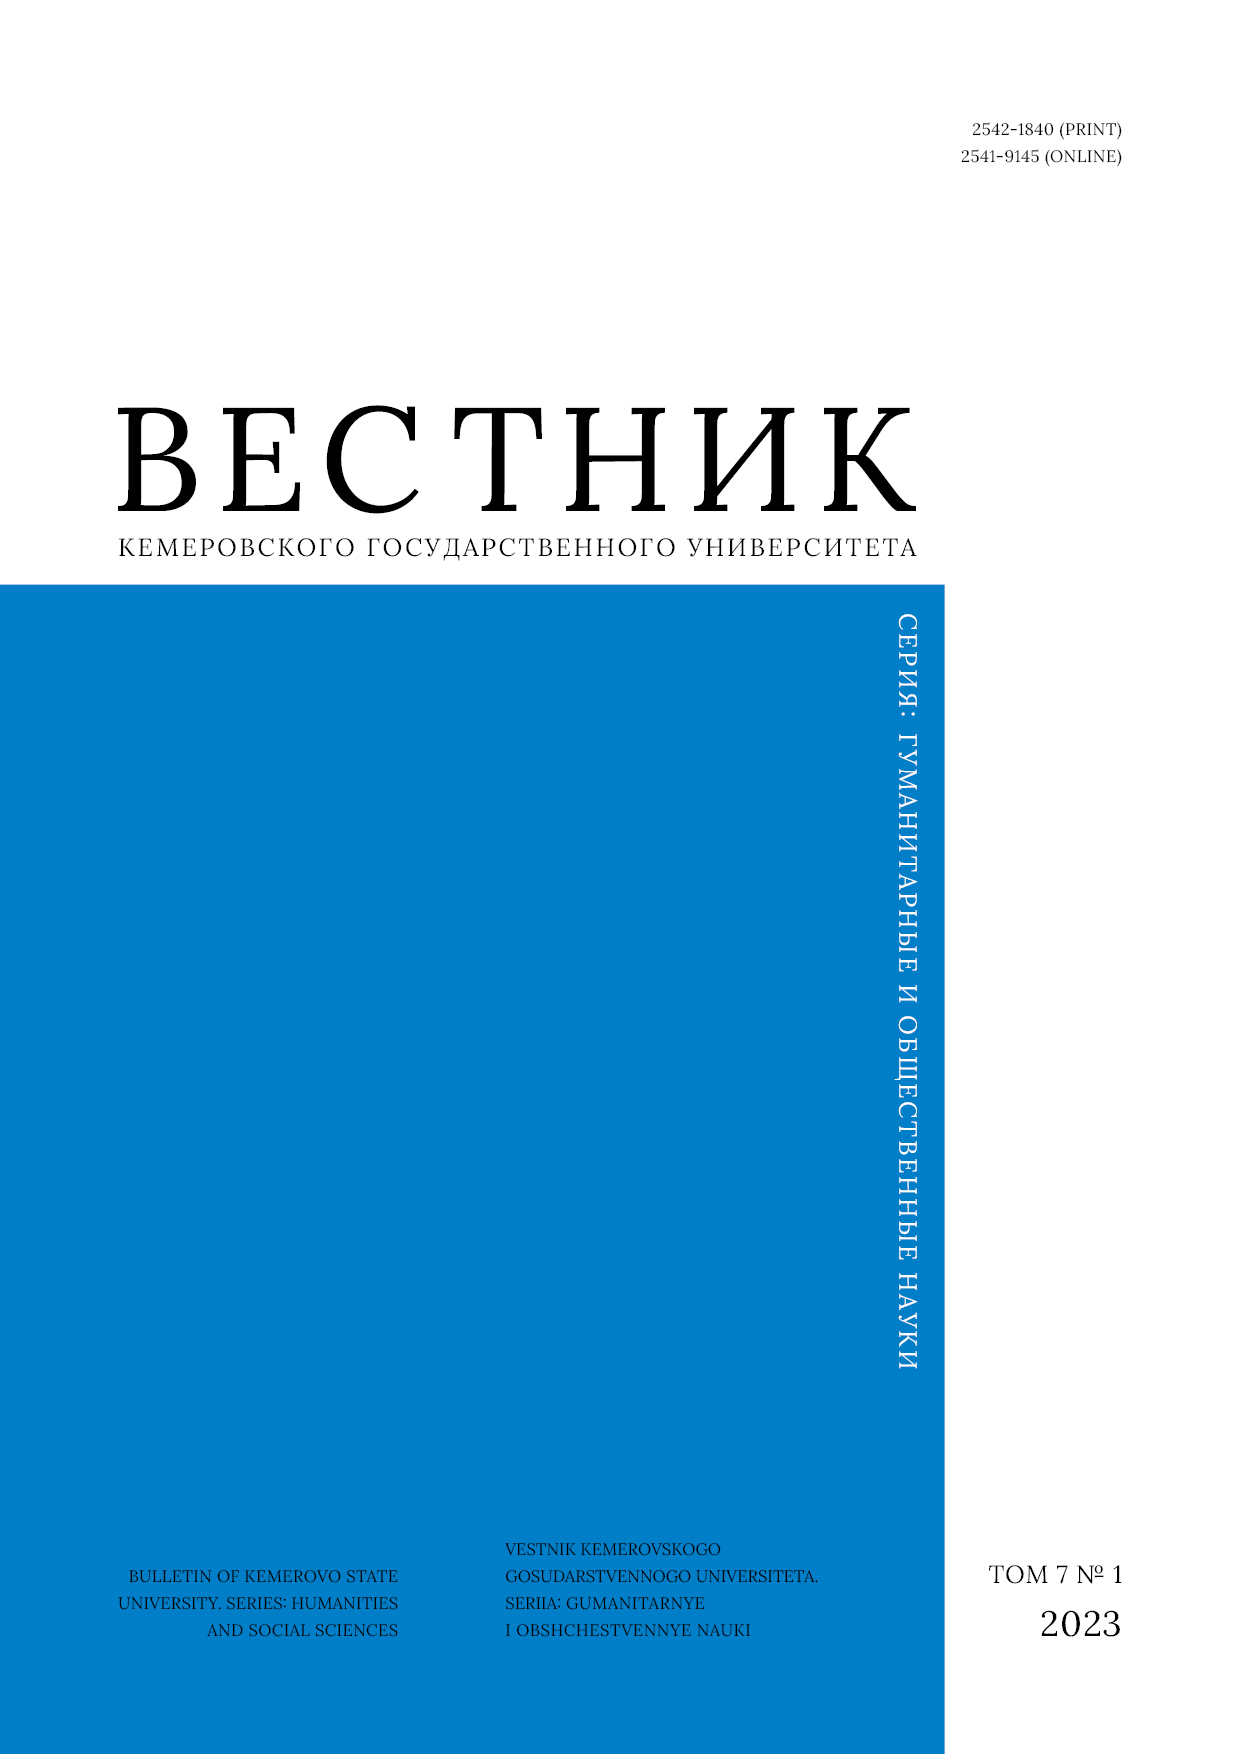                         Legal and Political Reforms and Amendments to the Constitutions of the USSR and the RSFSR during the Perestroika (1985 – Early 1990s)
            